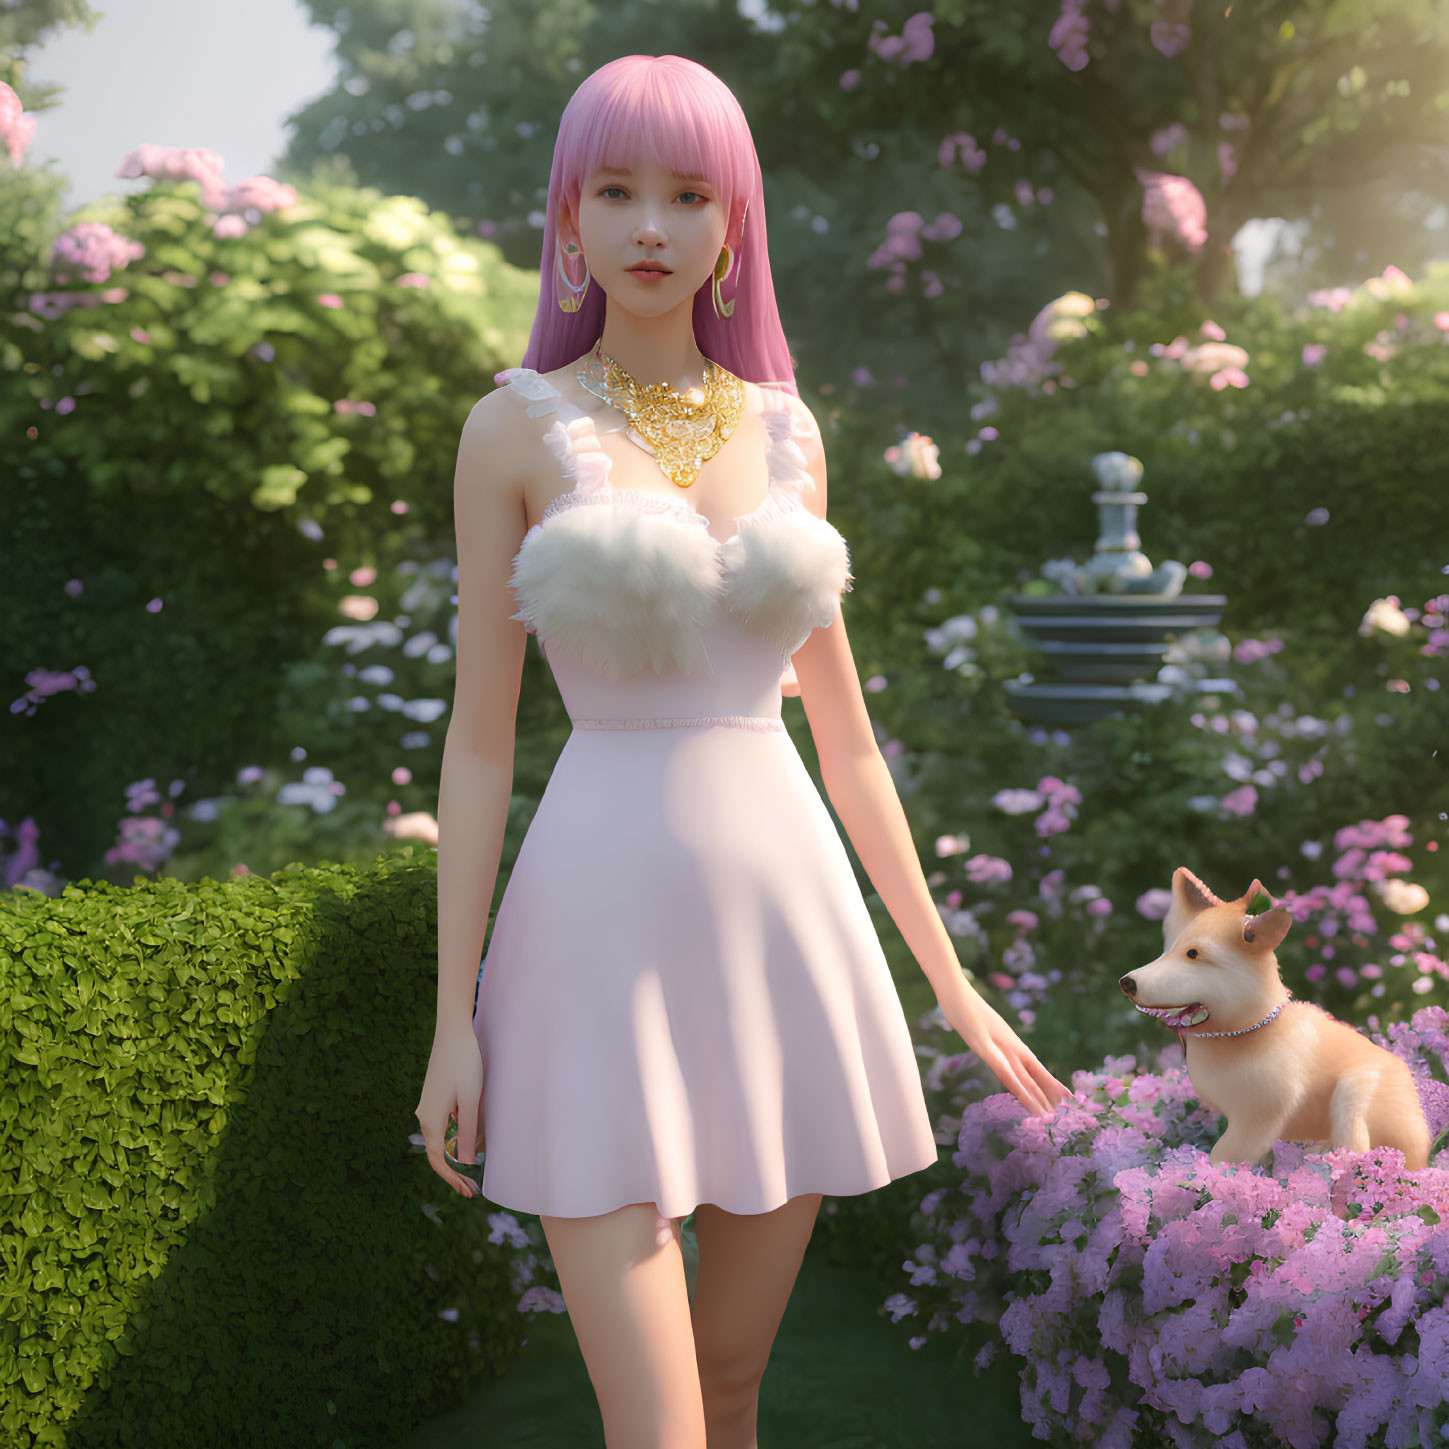 Digital artwork: Woman with pink hair in white dress, garden setting with blooming flowers, Shiba